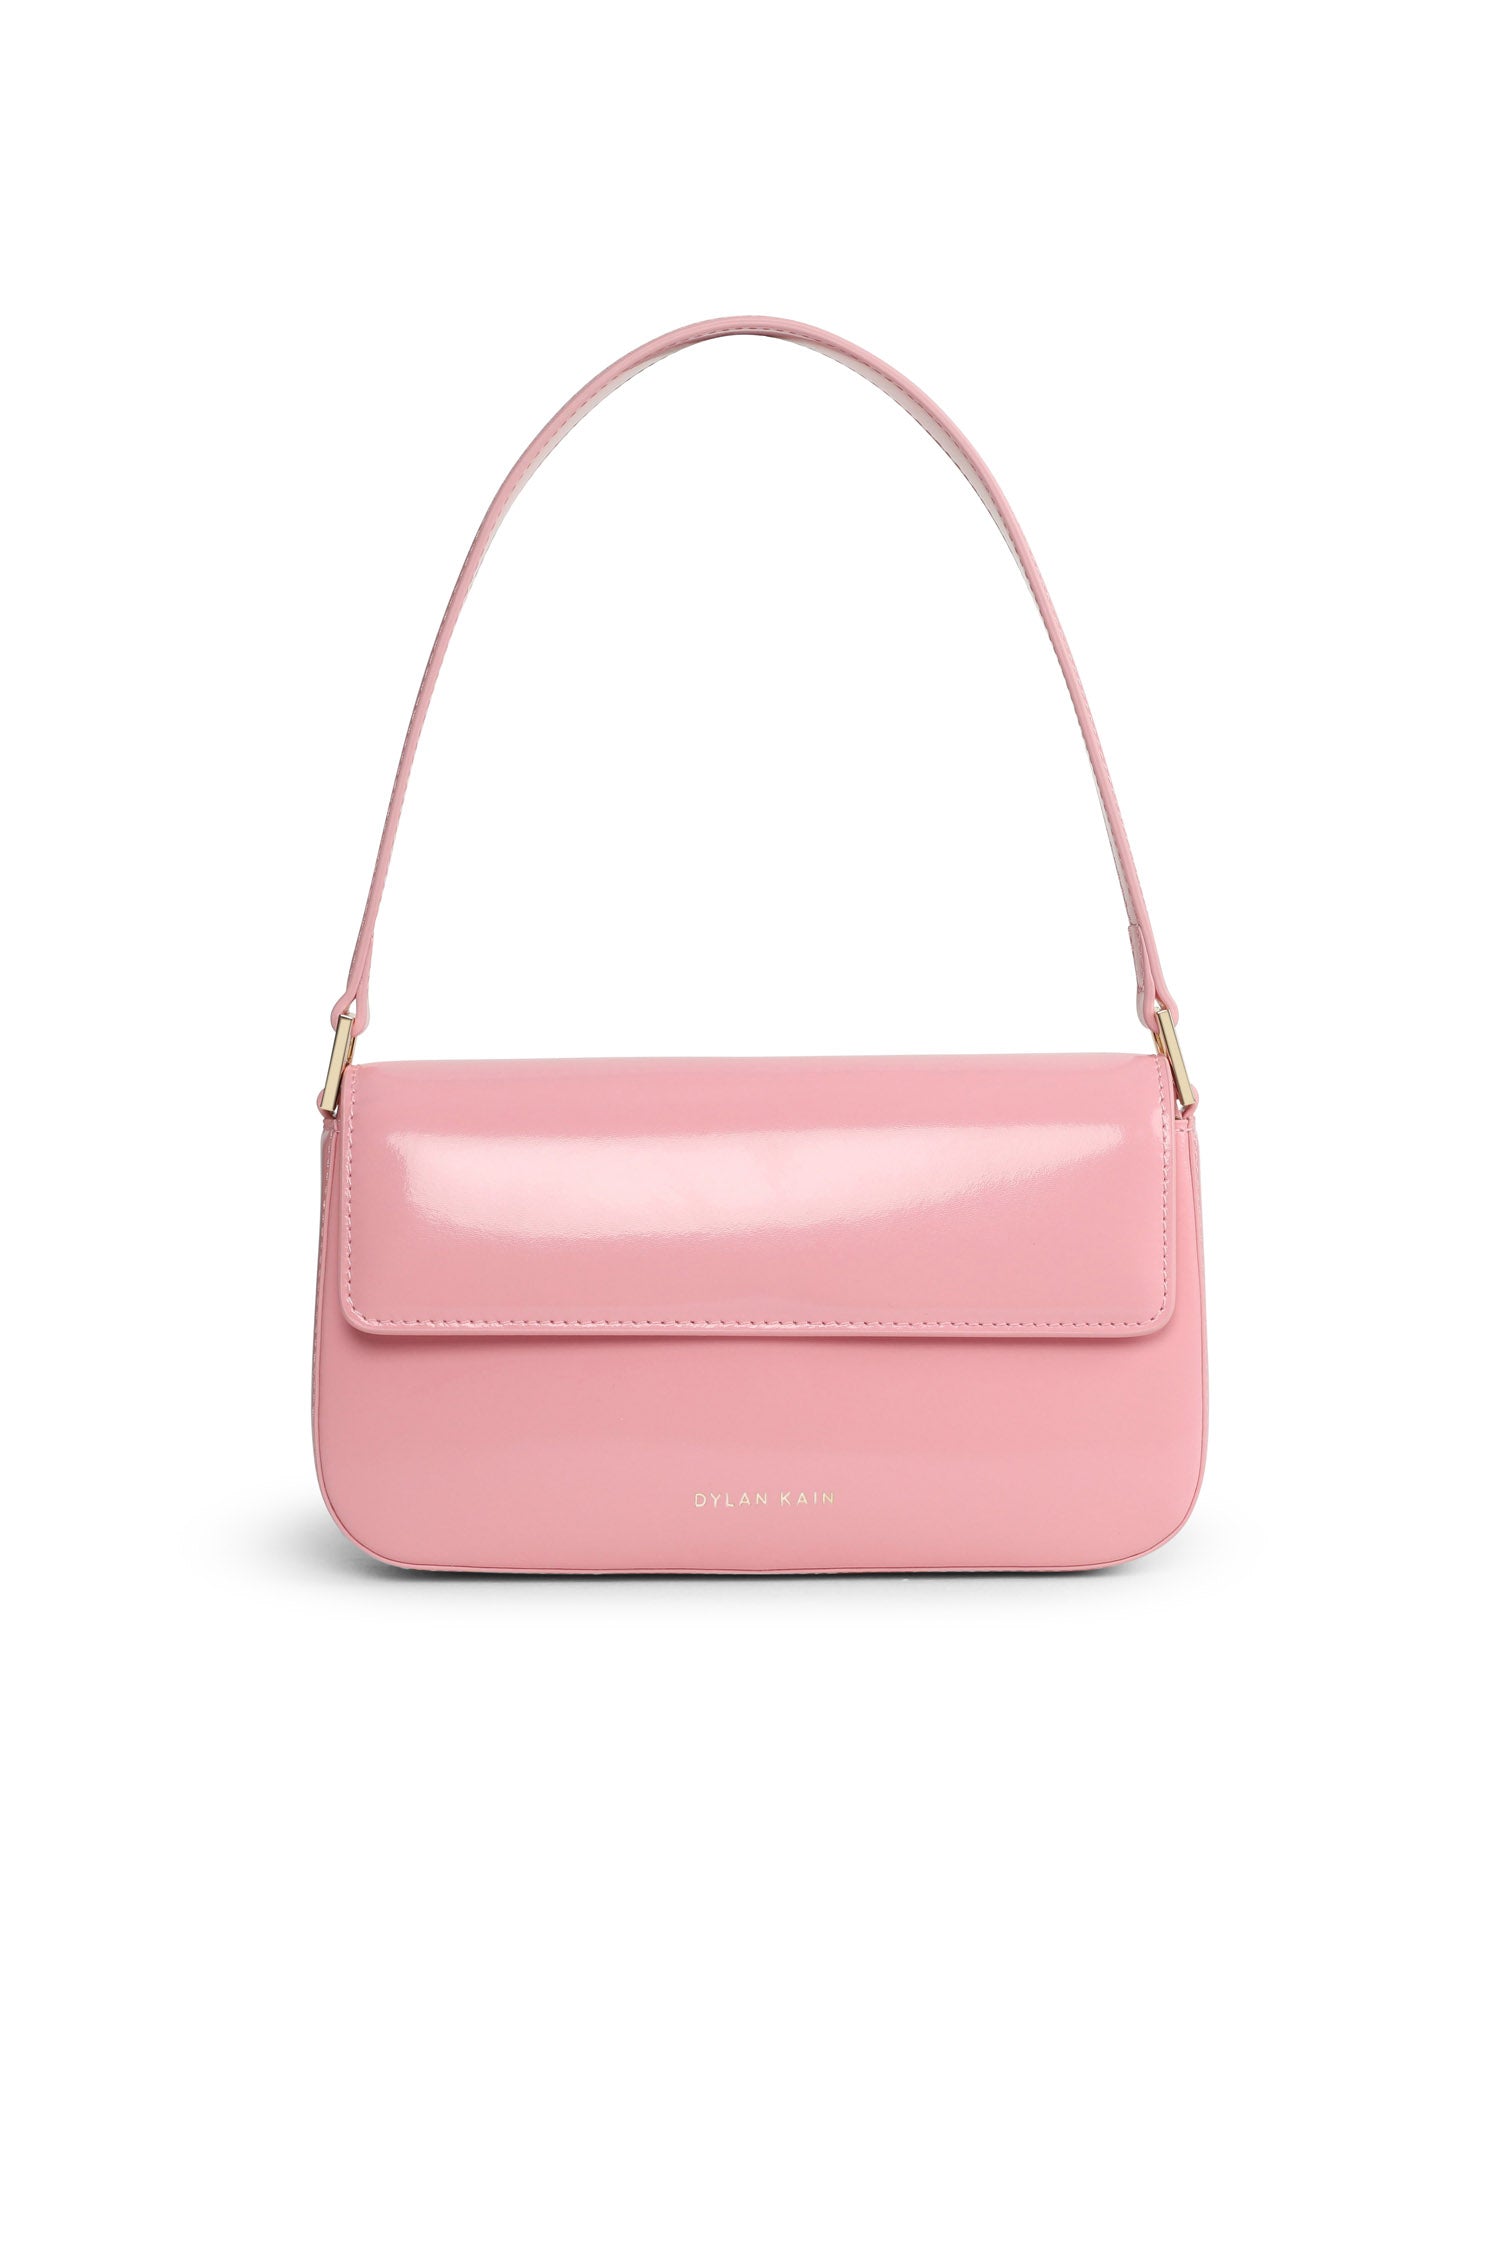 The Baguette Patent Bag Candy Pink Light Gold